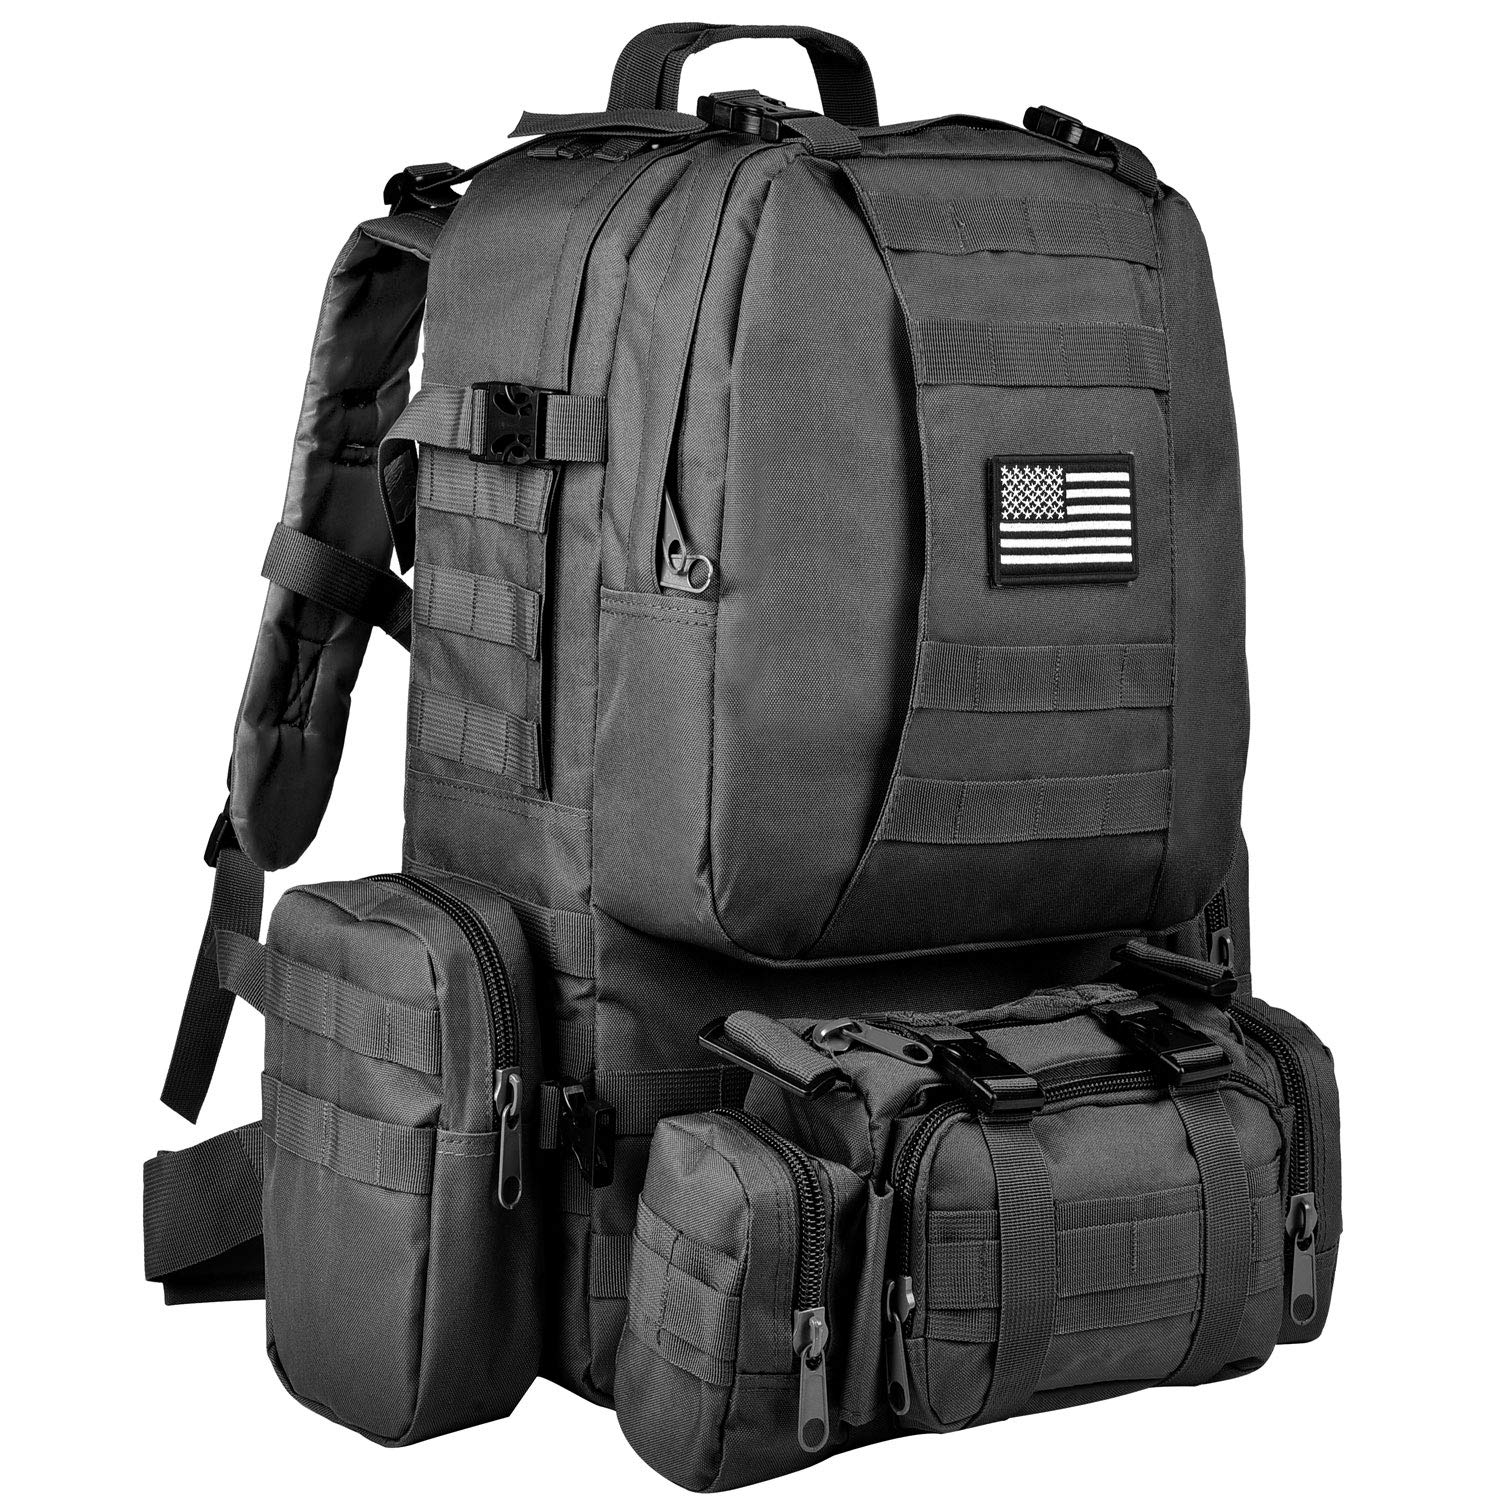 Review of CVLIFE Outdoor 60L Built-up Military Tactical Backpack Army Rucksacks 3 Day Assault Pack